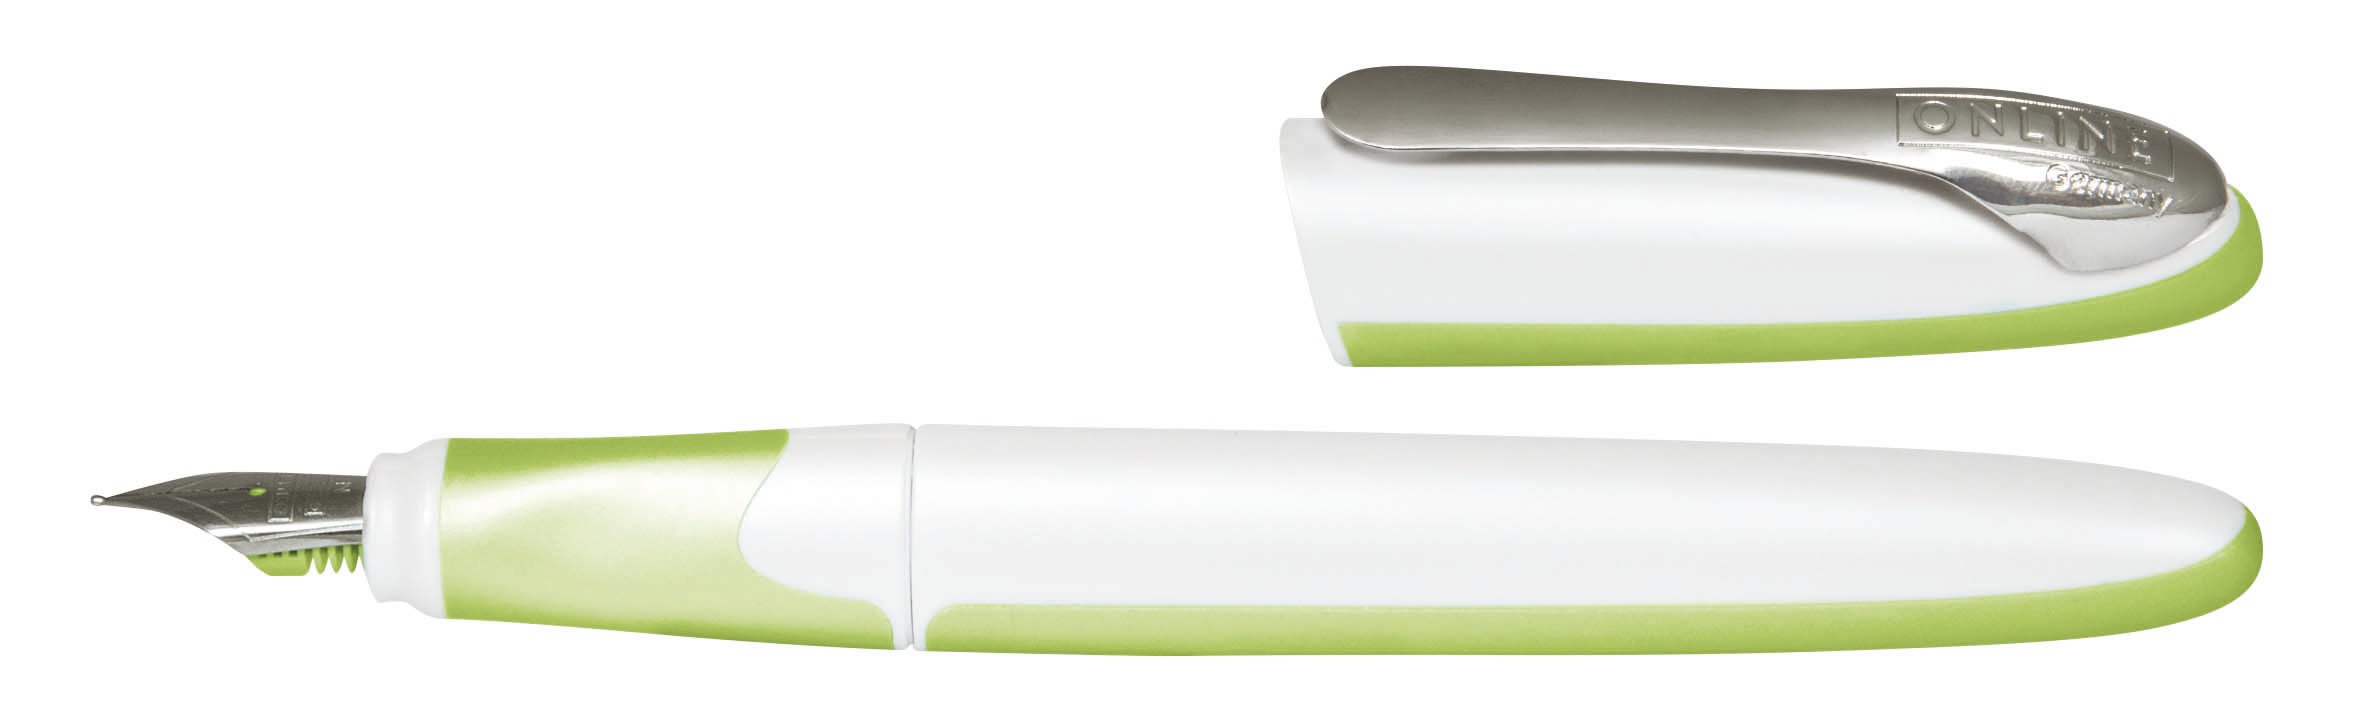 ONLINE Stylo plume Air 0.5mm 20144/3D Pastel Green